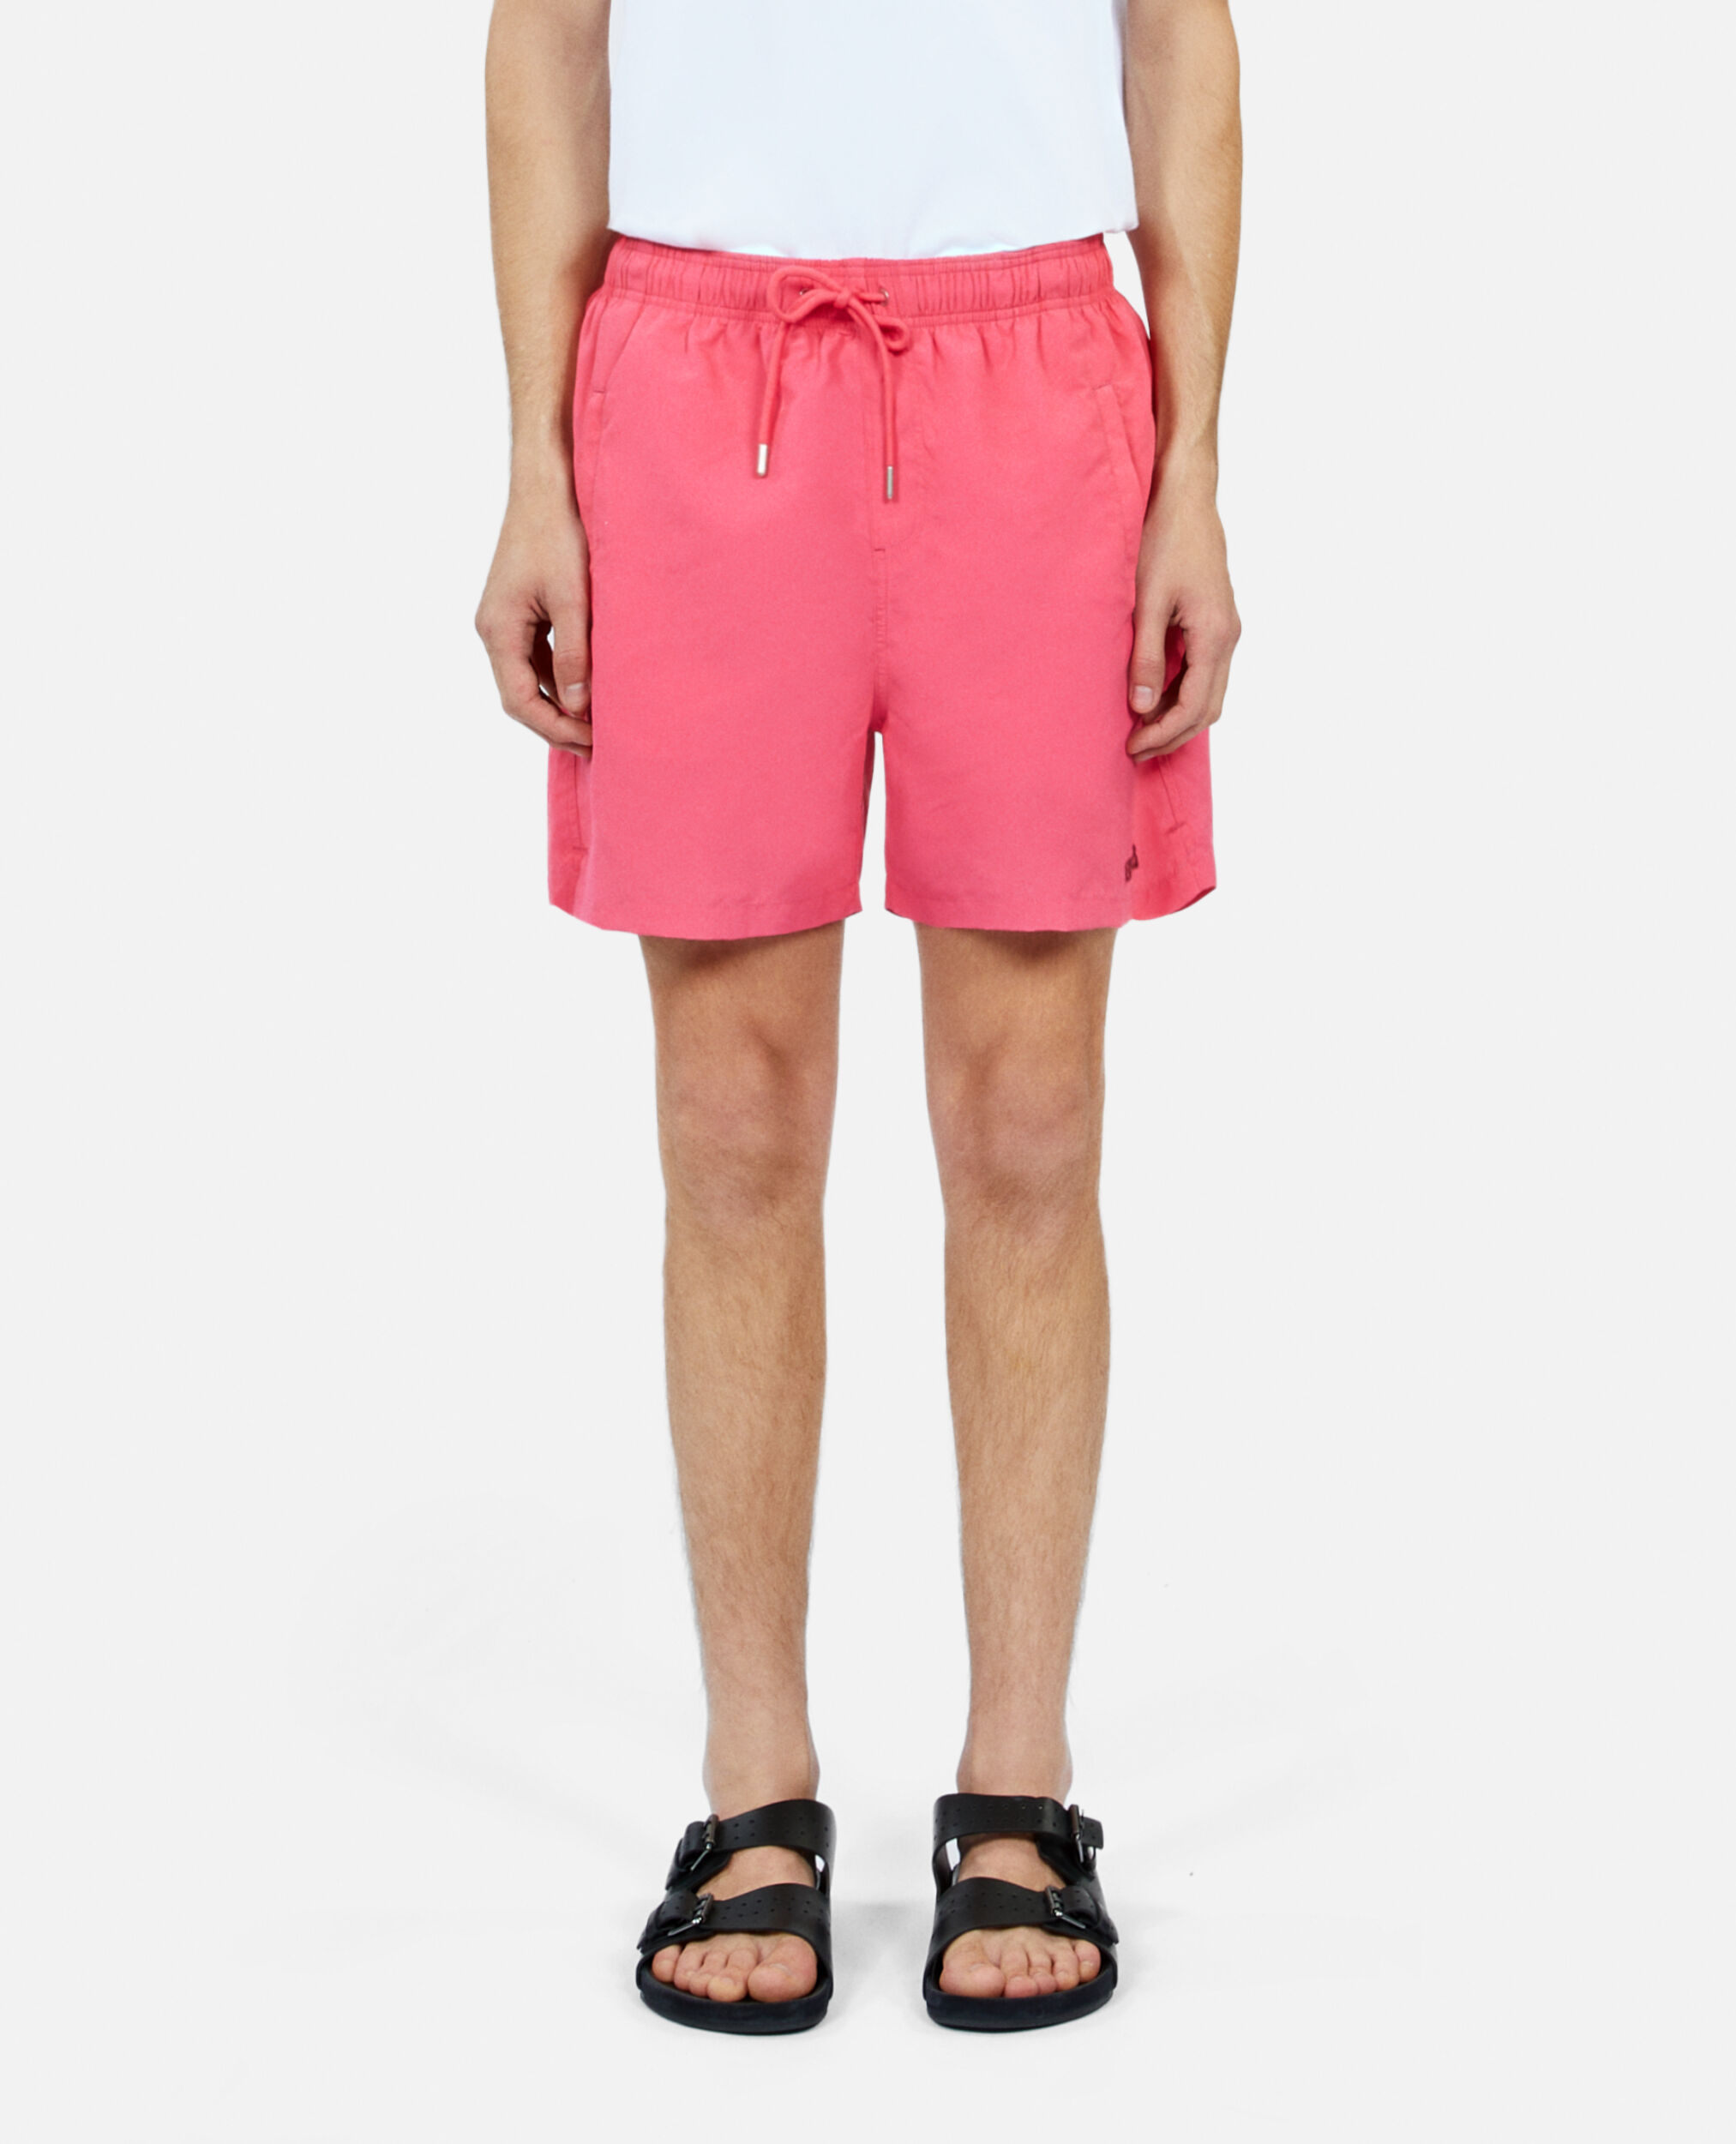 Rosa Badeshorts mit „What is“-Schriftzug, RETRO PINK, hi-res image number null